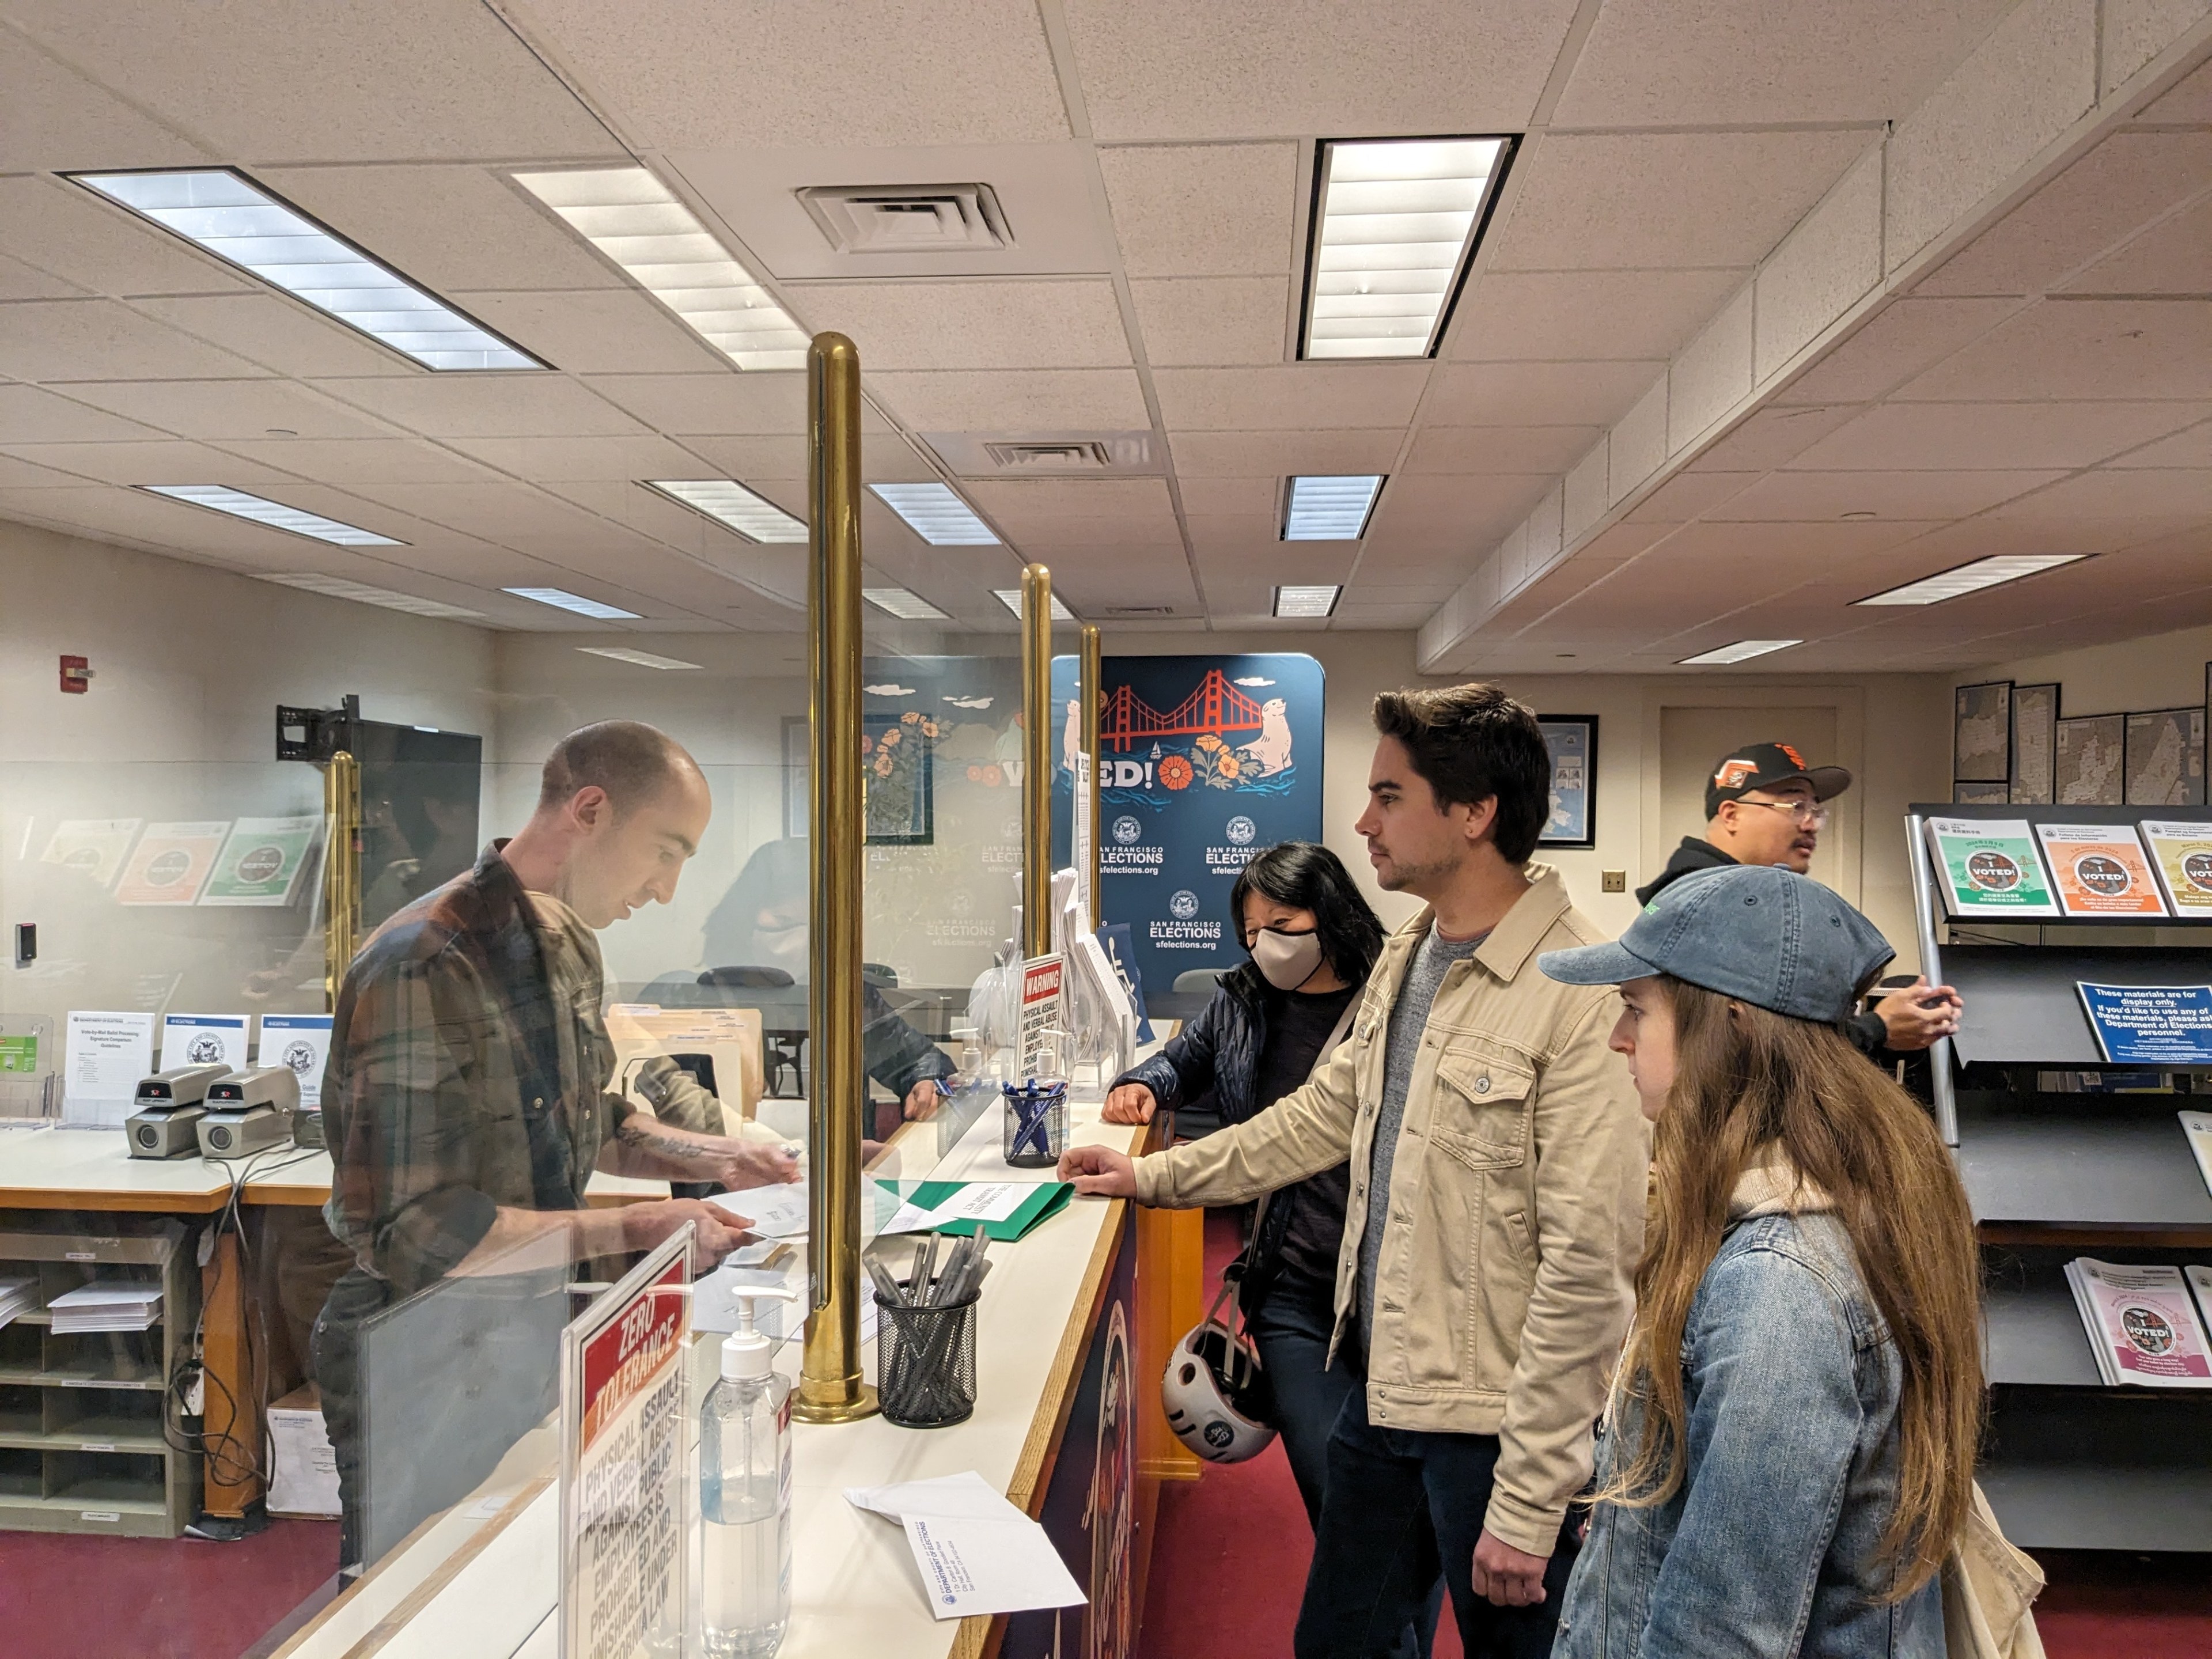 People queuing at a post office counter, some are wearing masks, and promotional posters are visible.